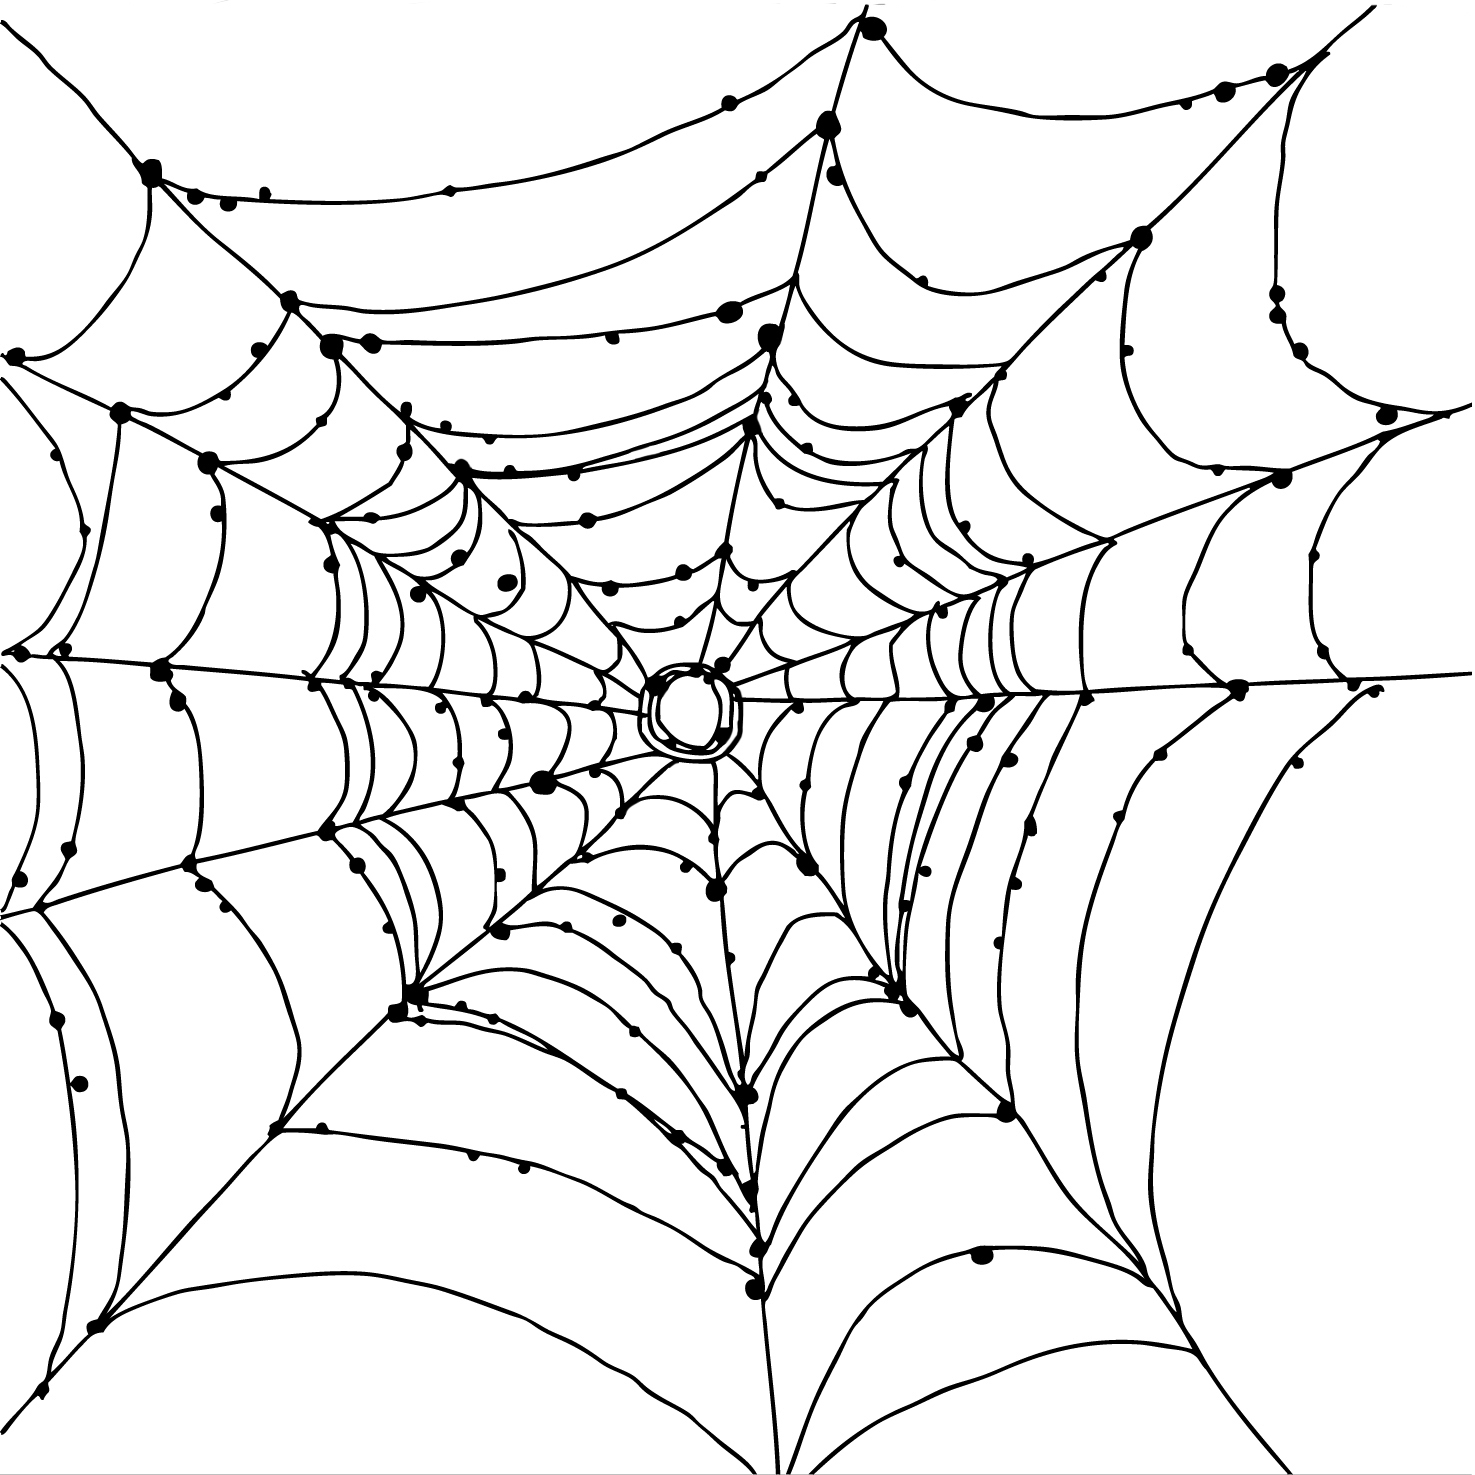 Coloring Pages of Spider Web